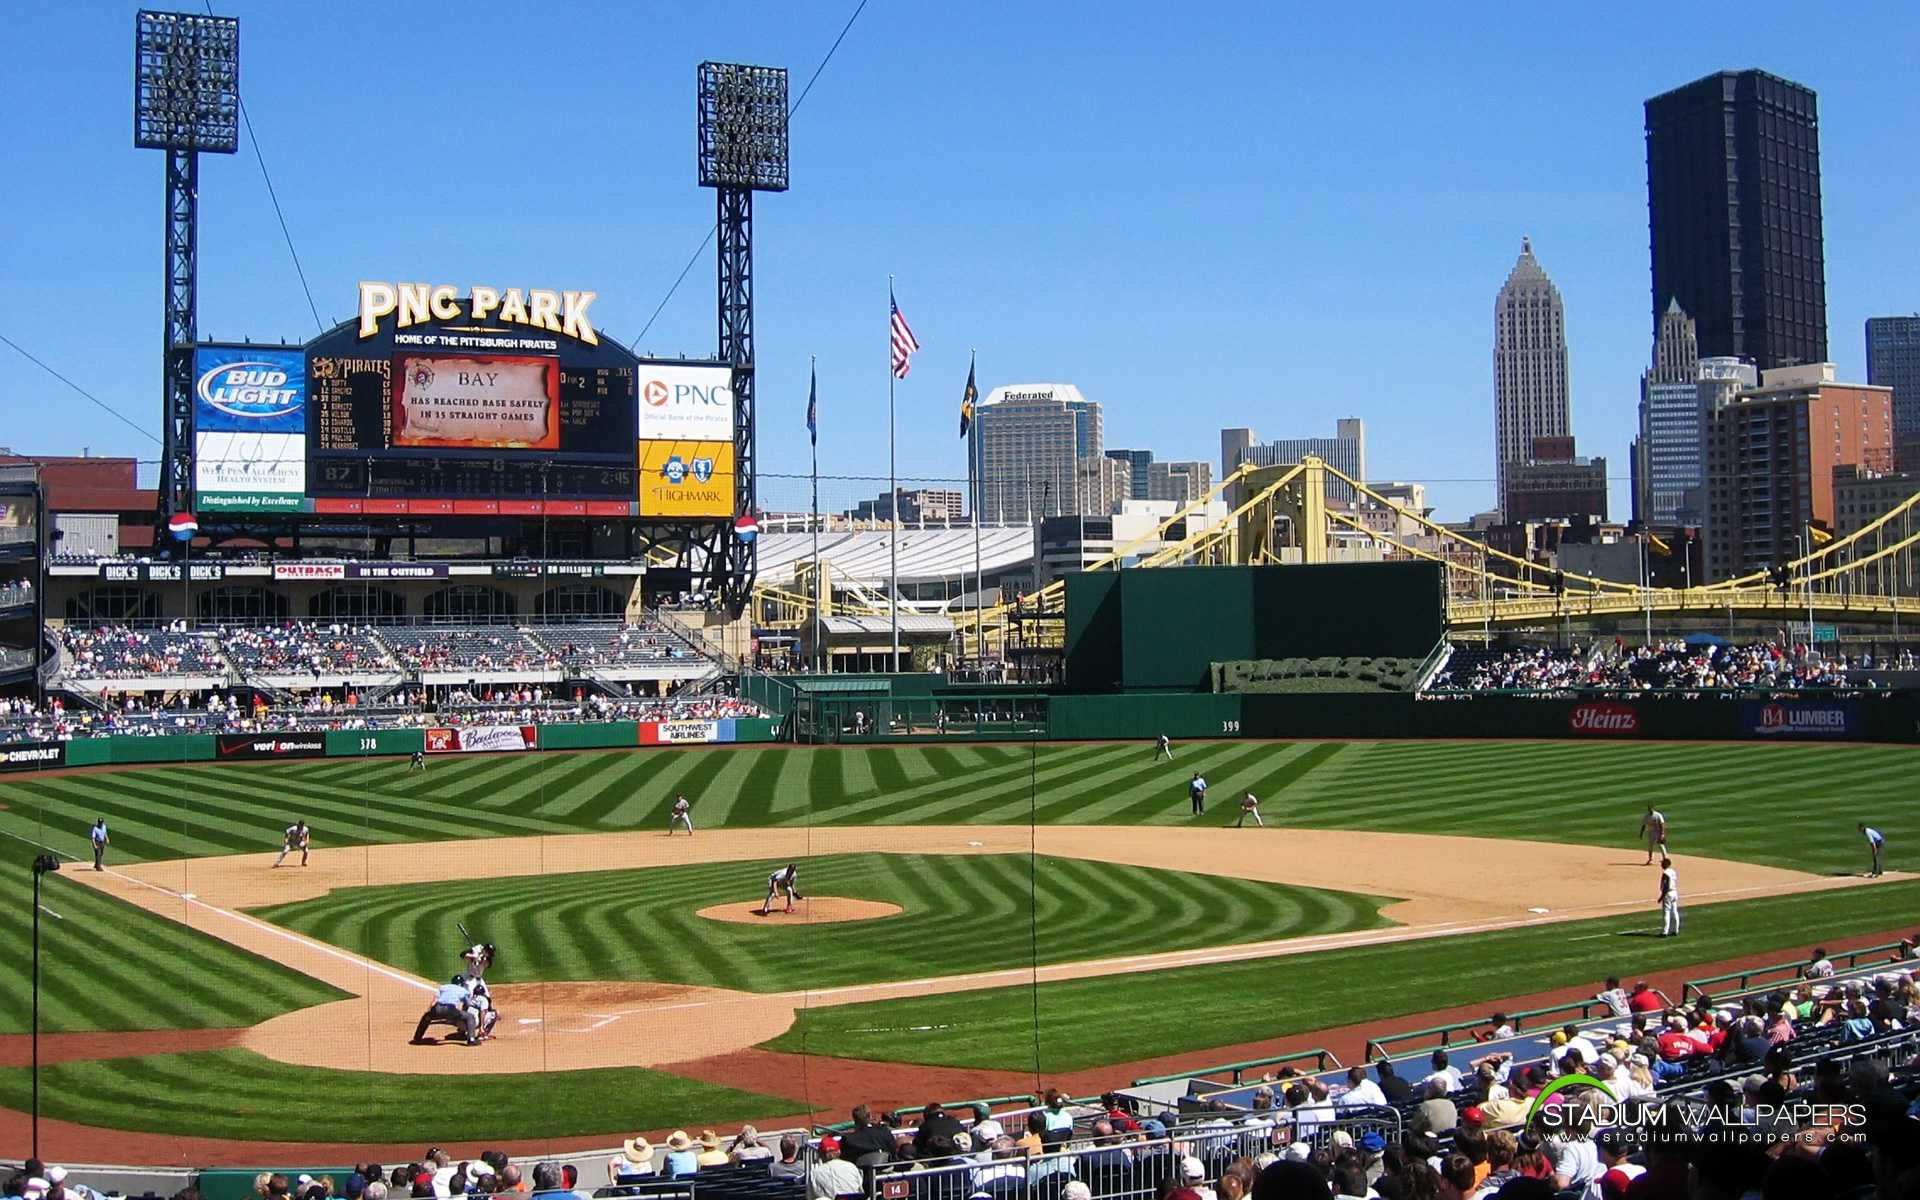 Pittsburgh Pirates Wallpaper High Resolution Photo Pnc Park